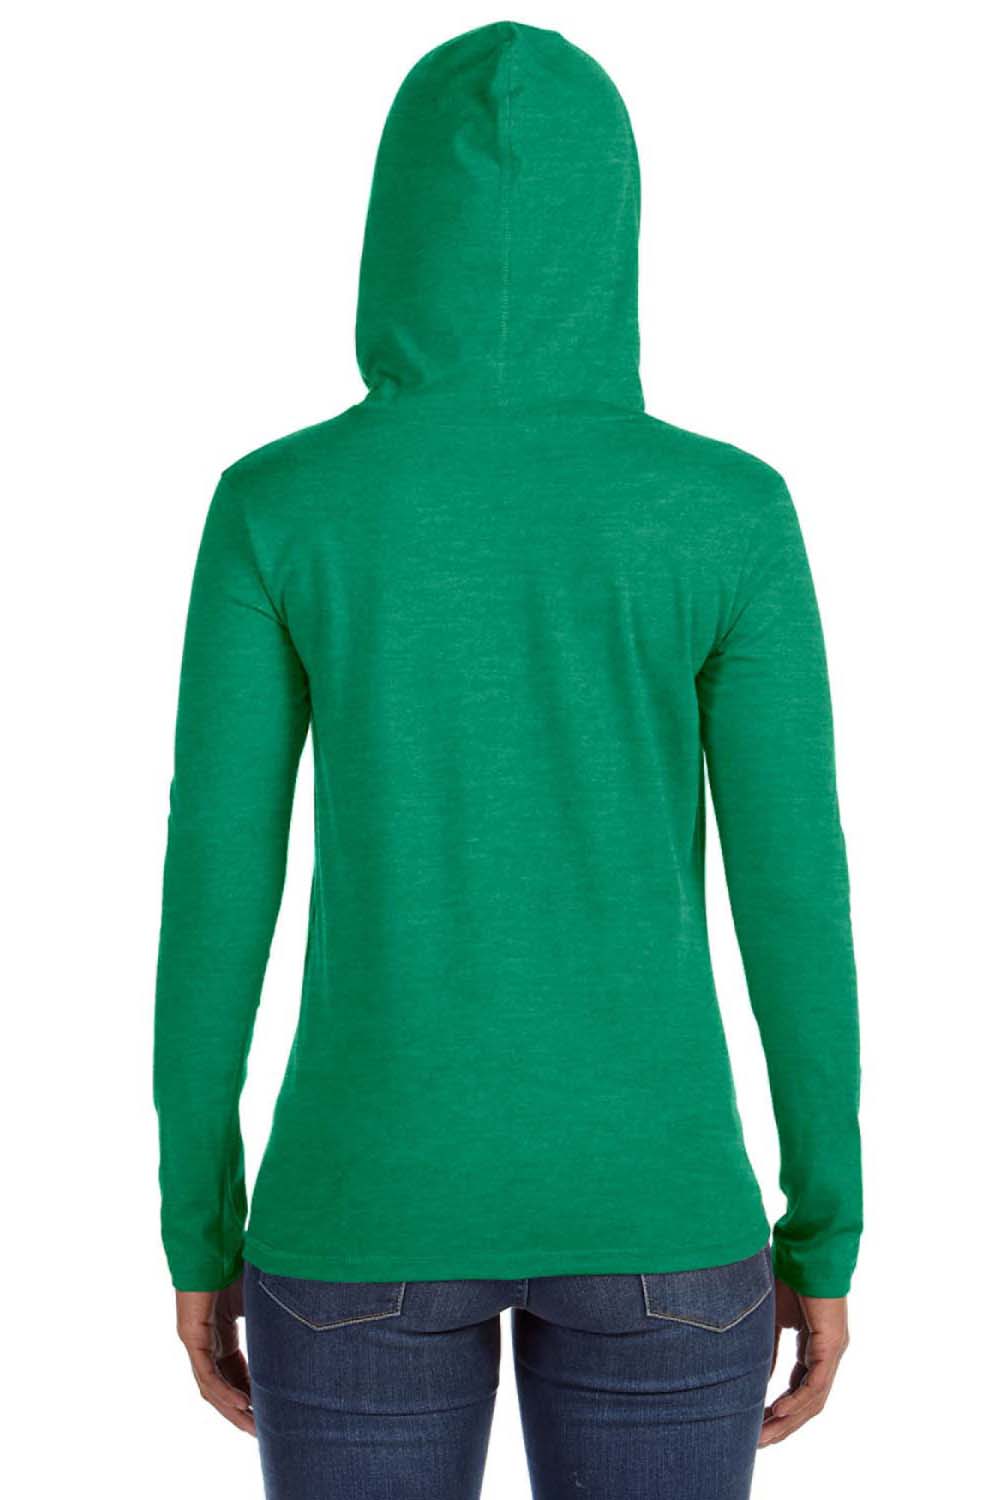 Anvil 887L Womens Long Sleeve Hooded T-Shirt Hoodie Heather Green/Neon Yellow Back